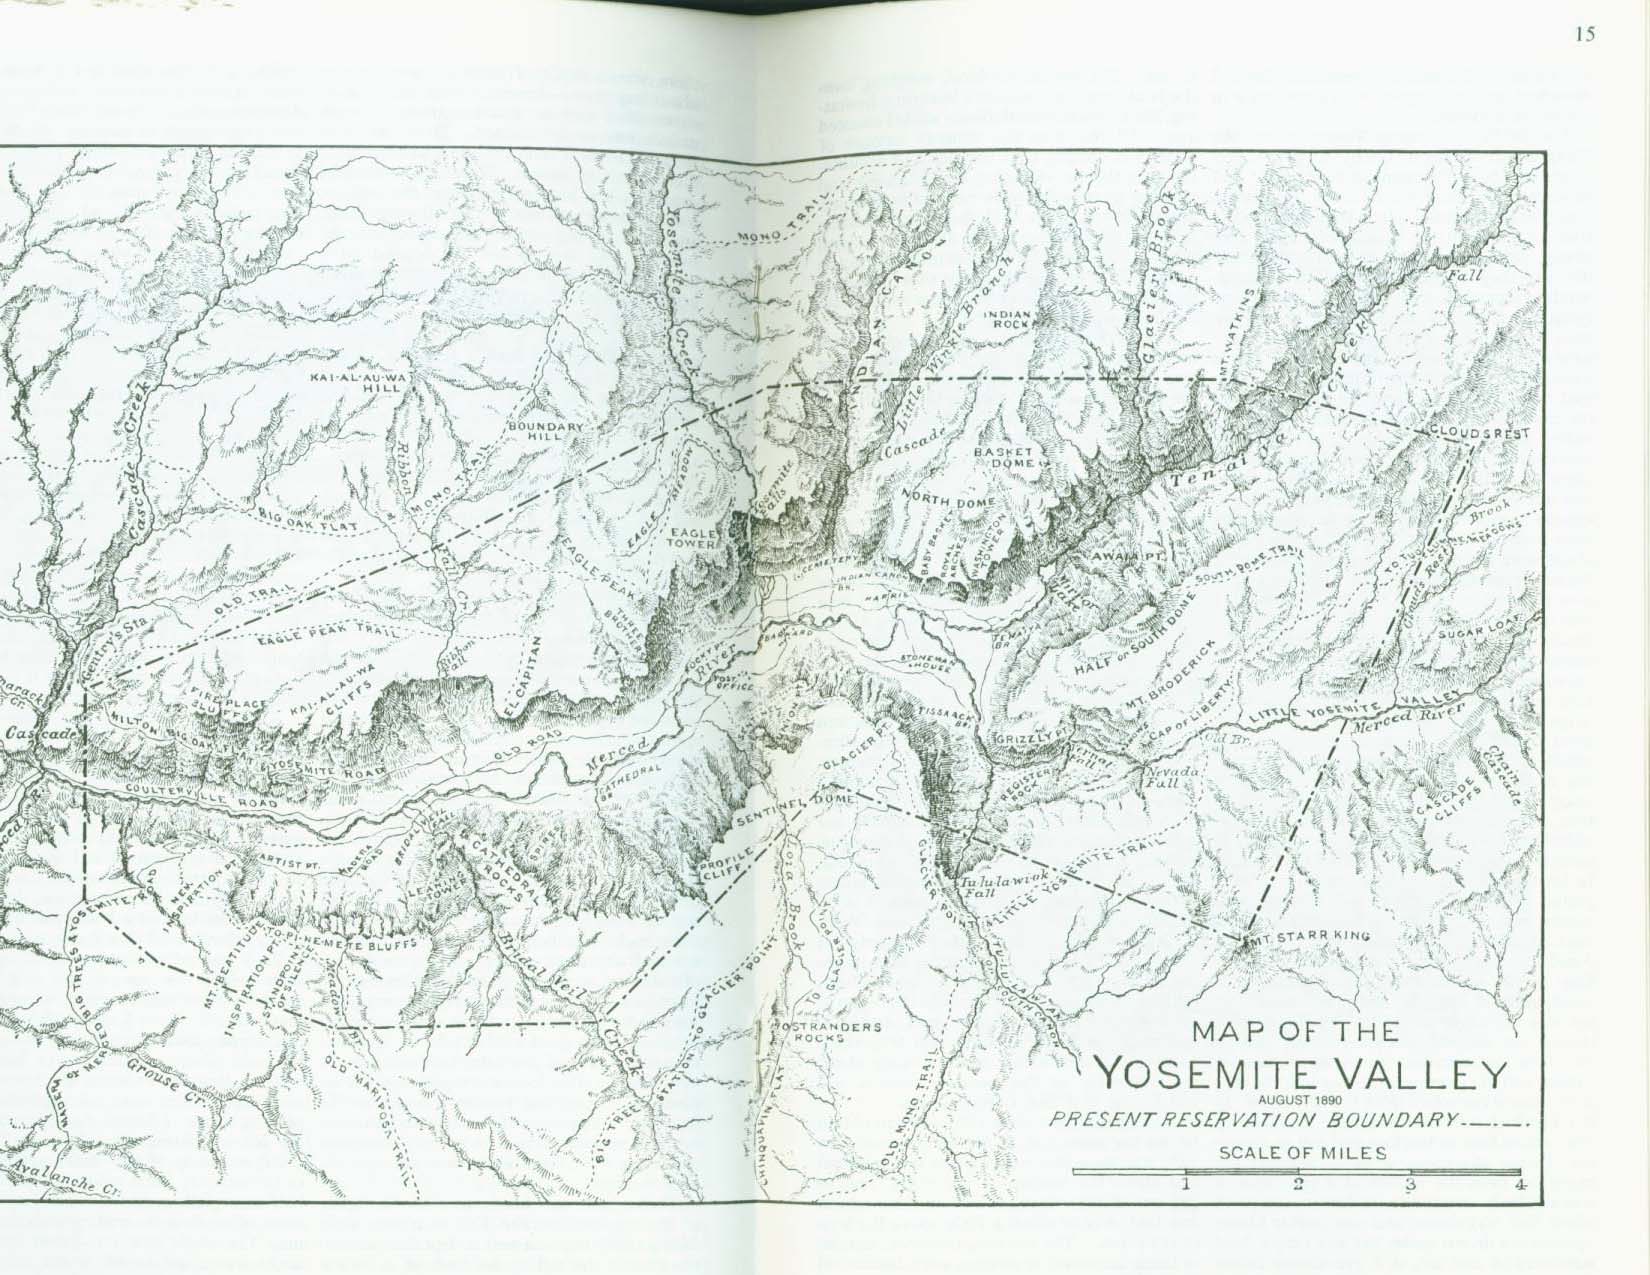 THE PROPOSED YOSEMITE NATIONAL PARK--treasures & features, 1890. vist0003g